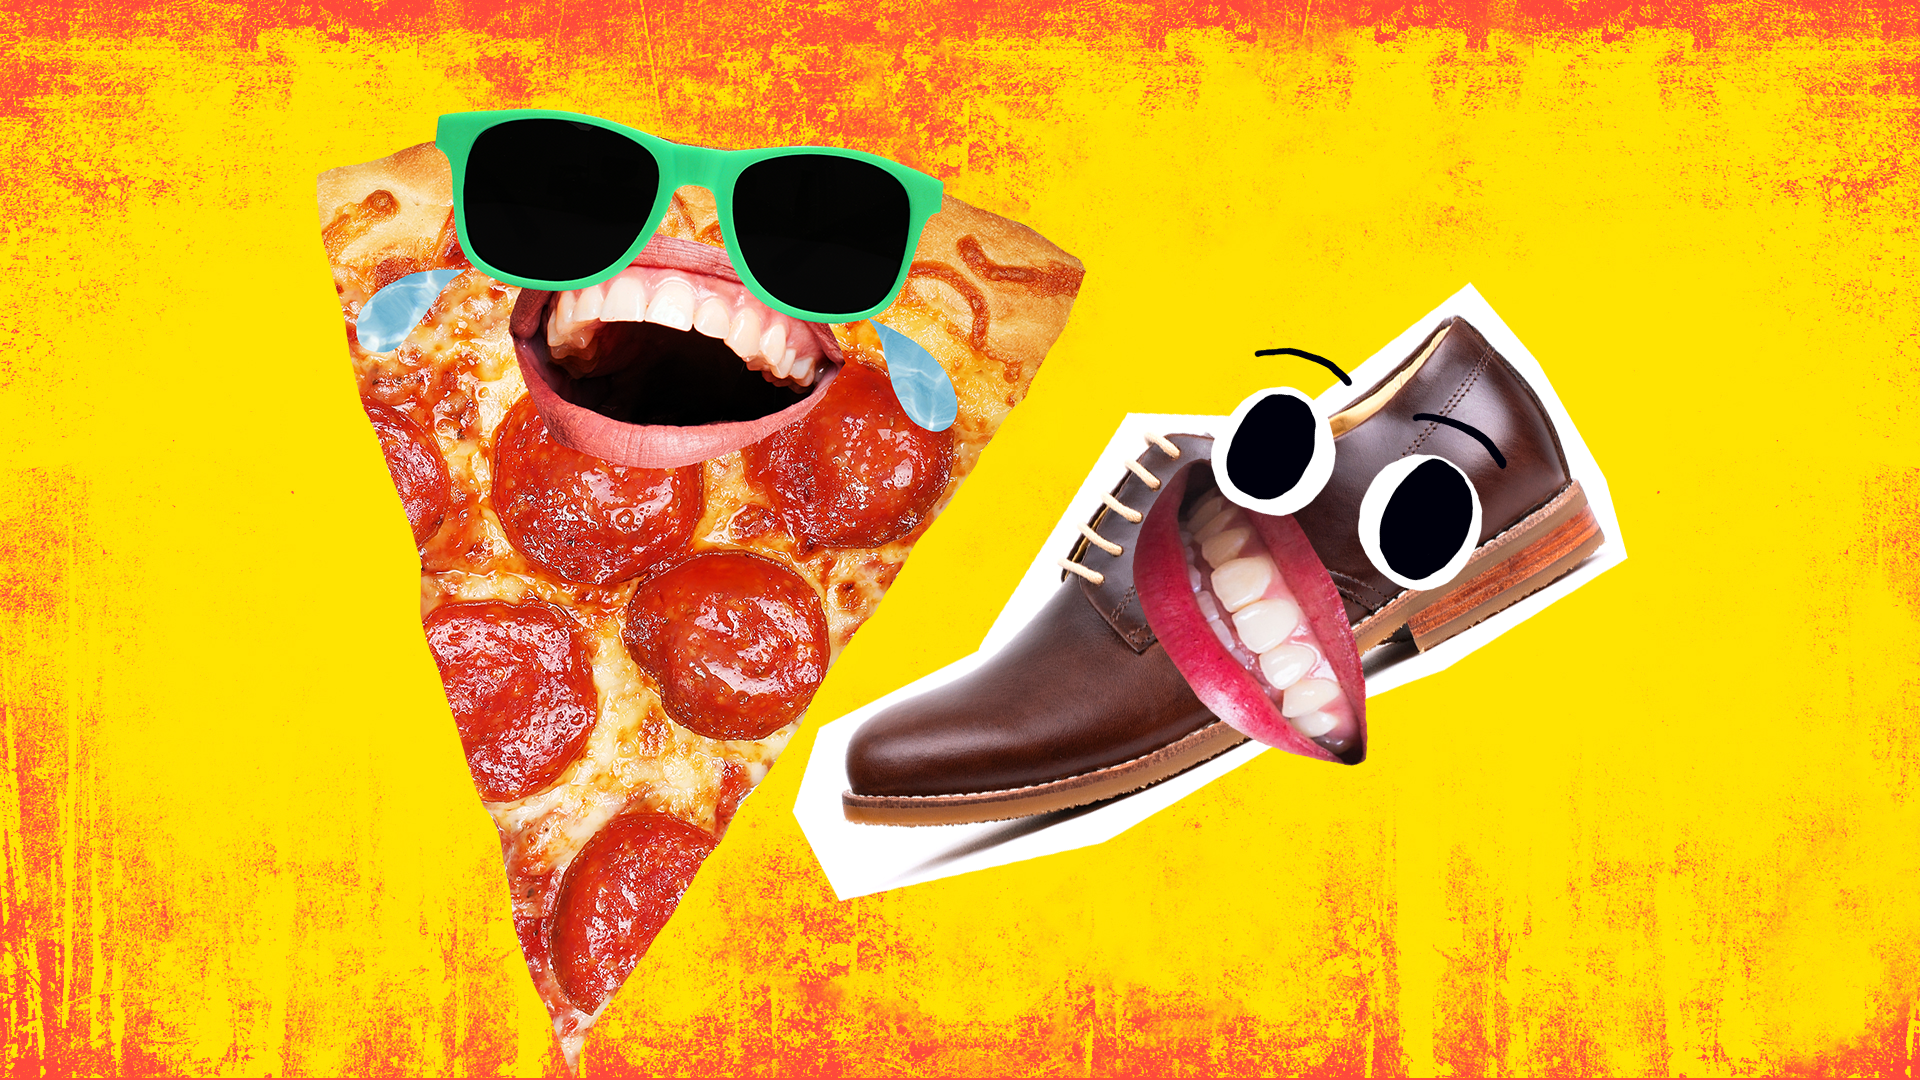 A laughing slice of pizza and a grinning brown shoe